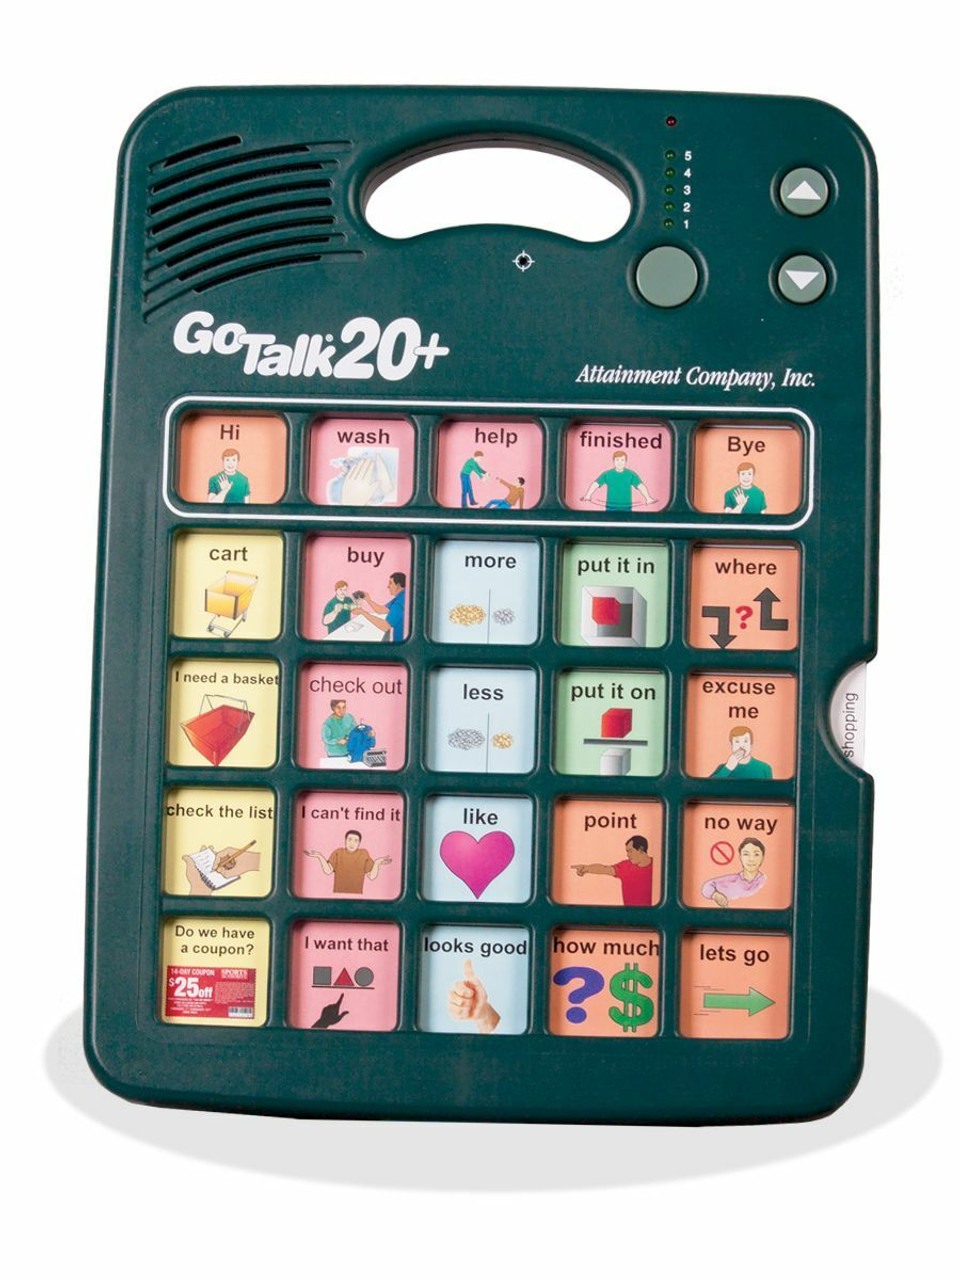 GoTalk 20+ has been discontinued and replaced with the GoTalk 20+ Lite Touch model. AVAILABLE IN TWO WEEKS ORDER NOW! Call with questions 763-755-1402